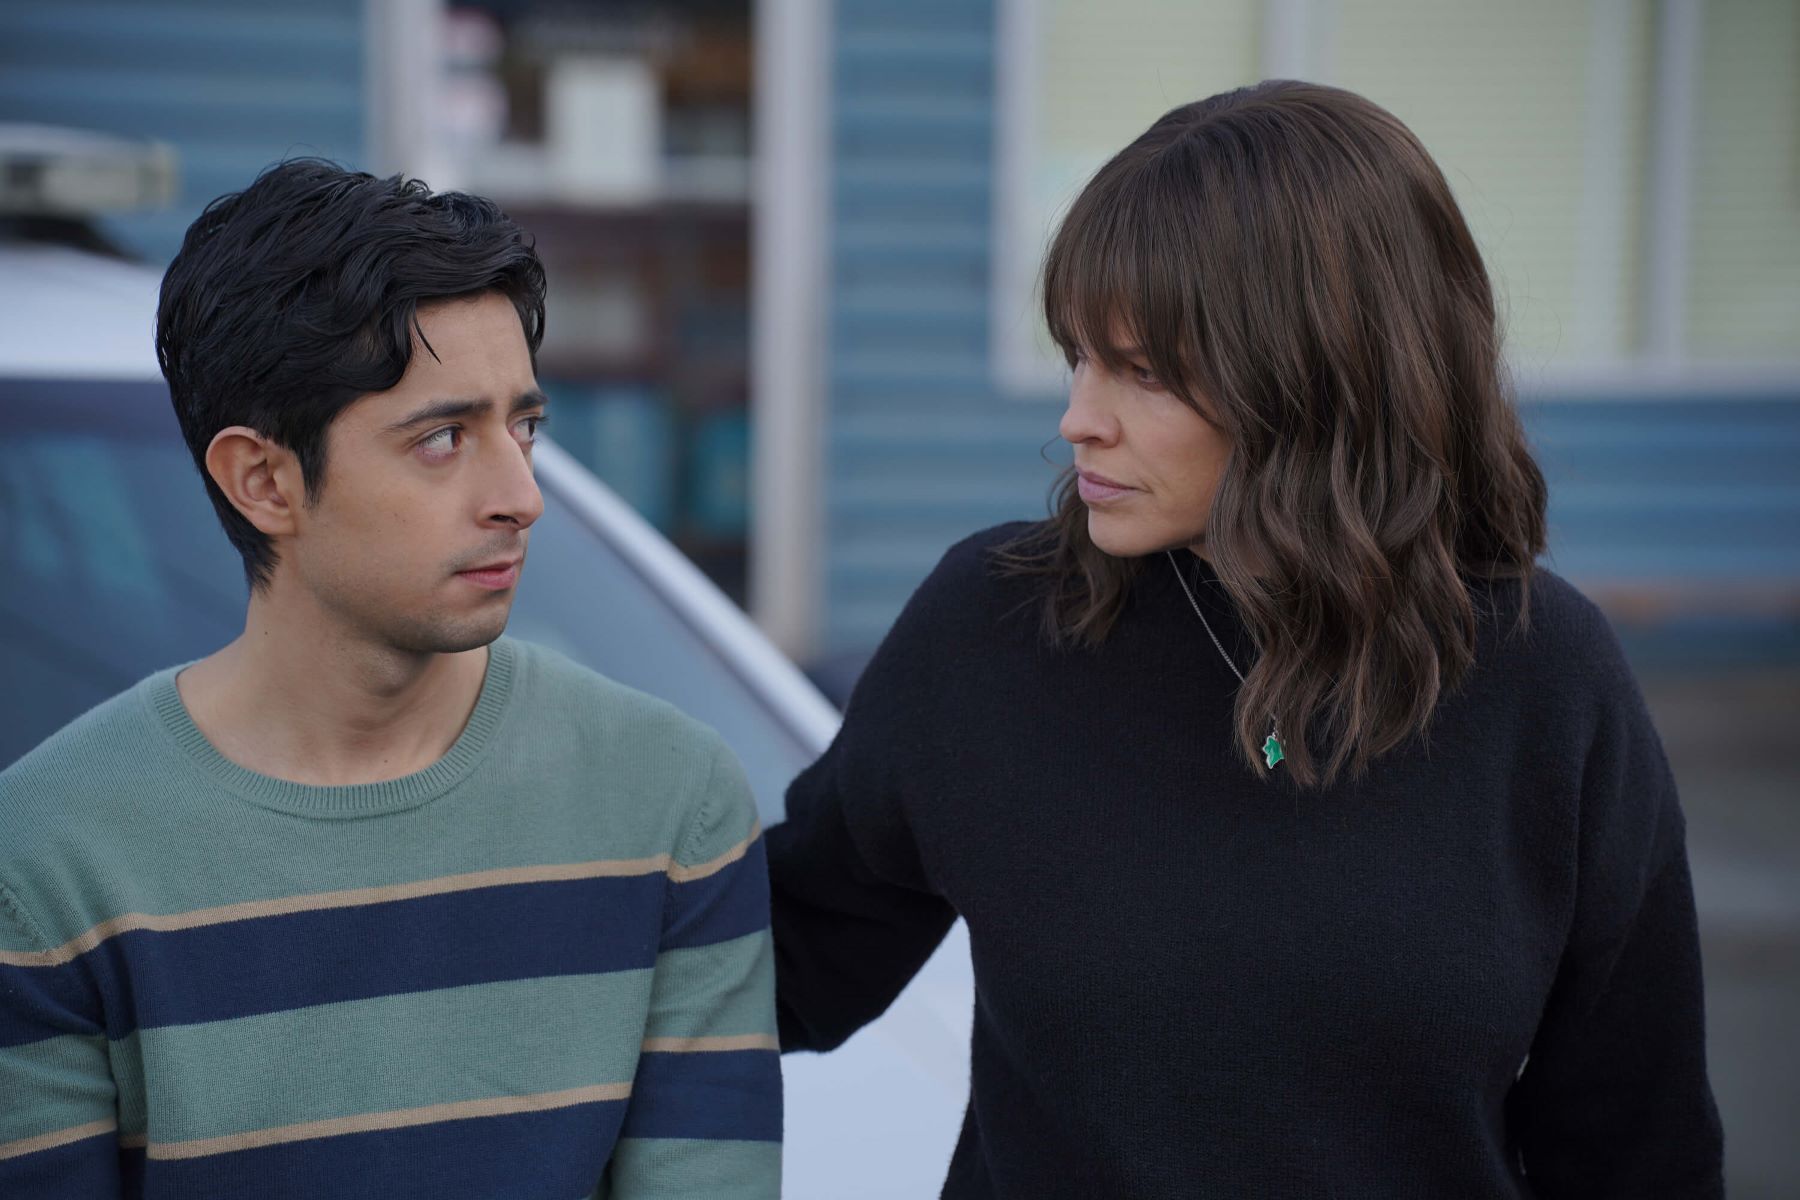 Pablo Castelblanco as Gabriel Tovar and Hilary Swank as Eileen Fitzgerald in 'Alaska Daily' Episode 7 on ABC. Gabriel wears a light green sweater with dark blue and tan stripes. Eileen wears a black sweater.